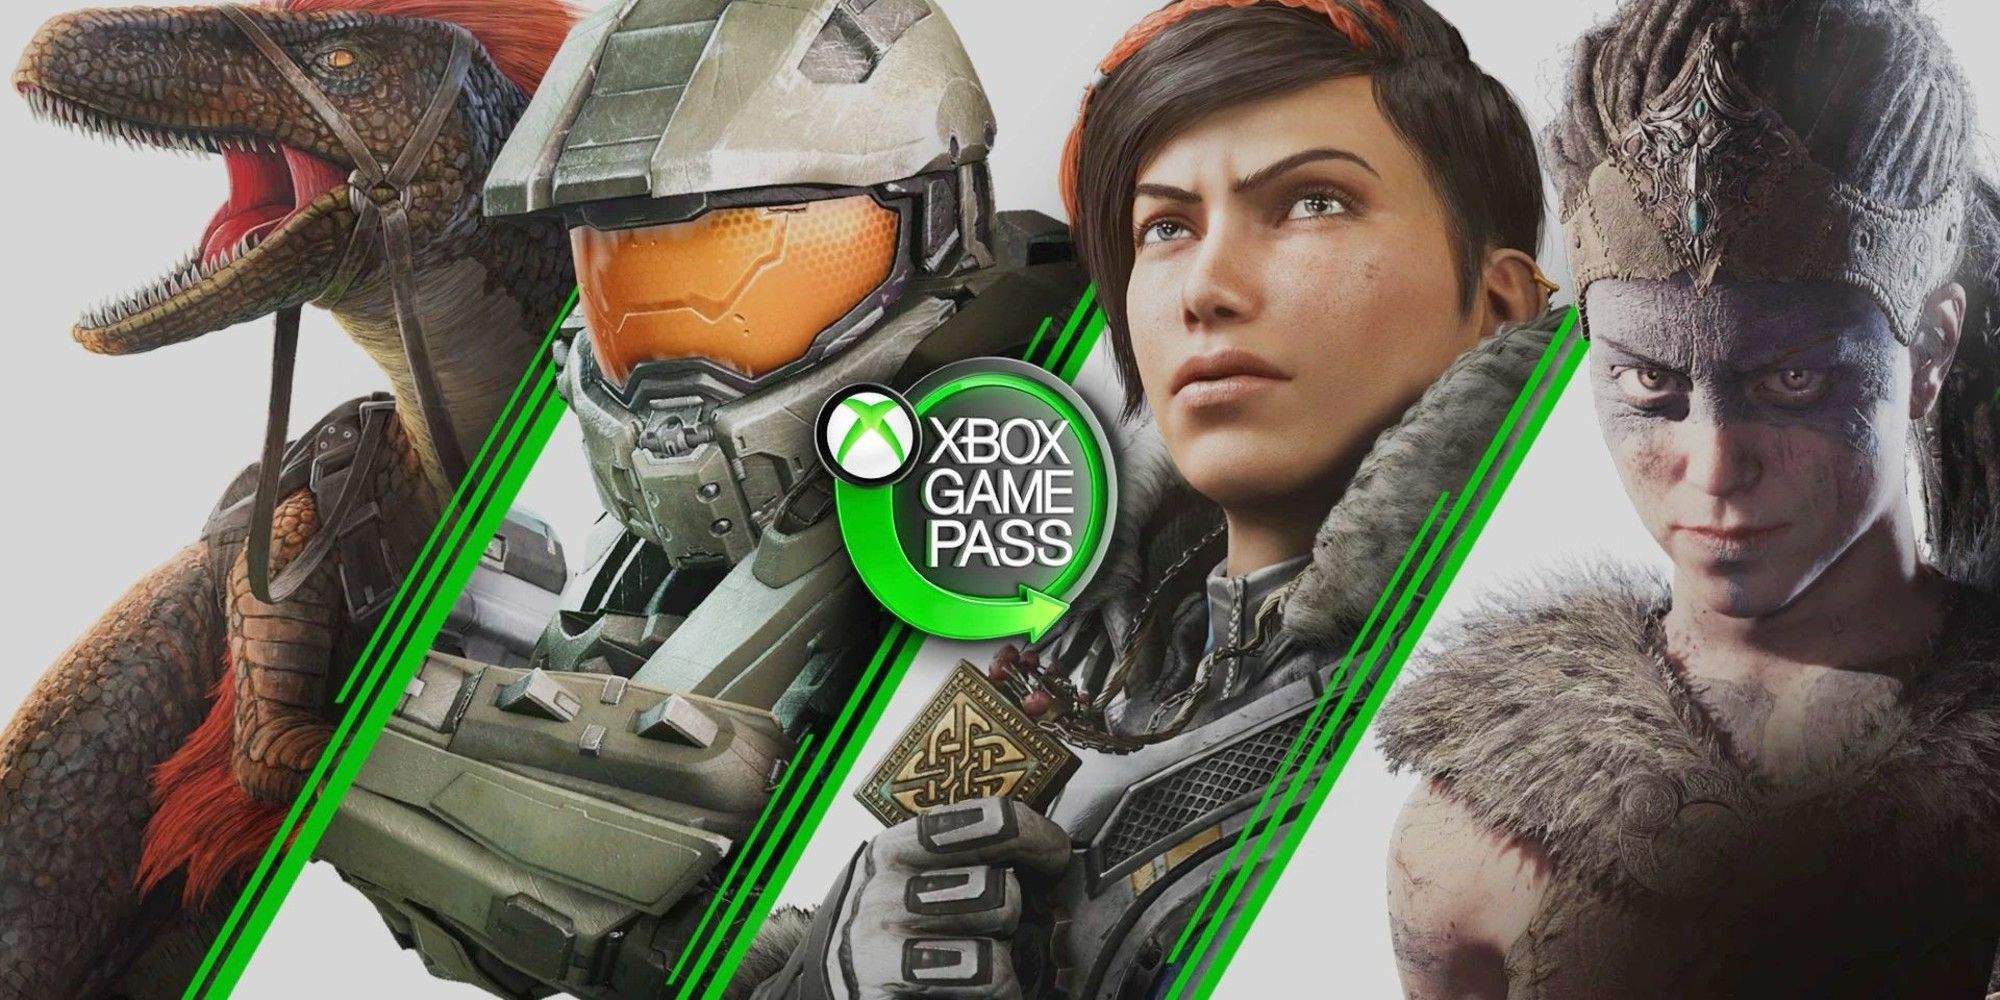 A banner from xbox game pass featuring a dinosaur from Ark Survival Evolved, Master Chief from Halo, Kait Diaz from Gears of War 5, and Senua from Hellblade: Senua's Sacrifice